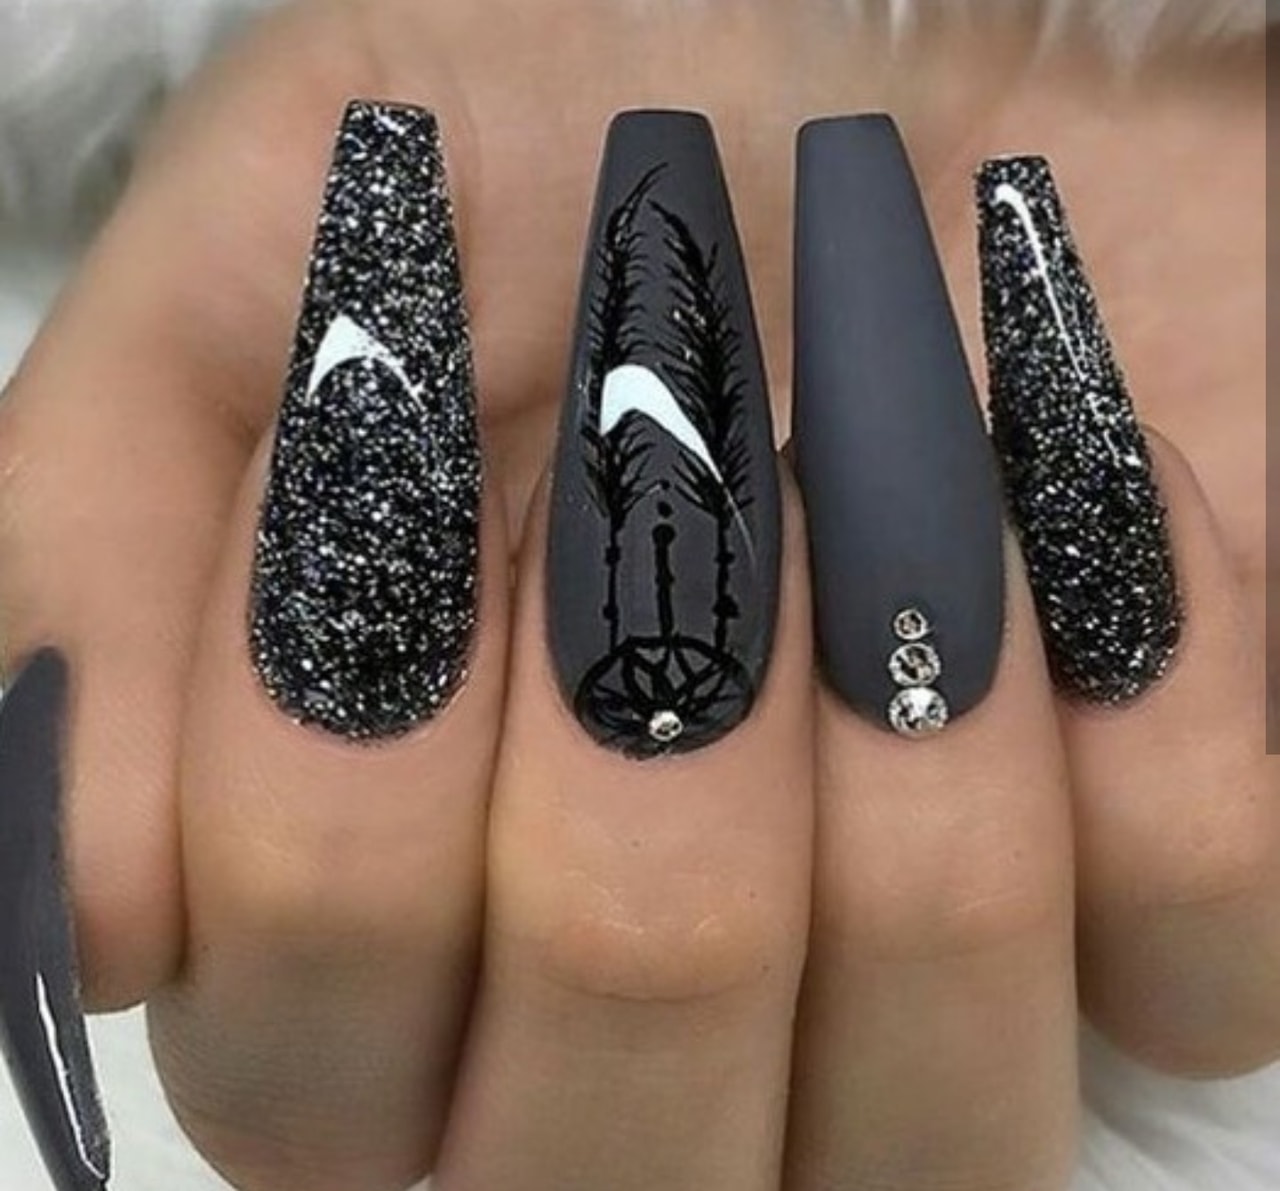 Ballerina nails... 75+ Hottest Looking Nail Shapes for Women - 63